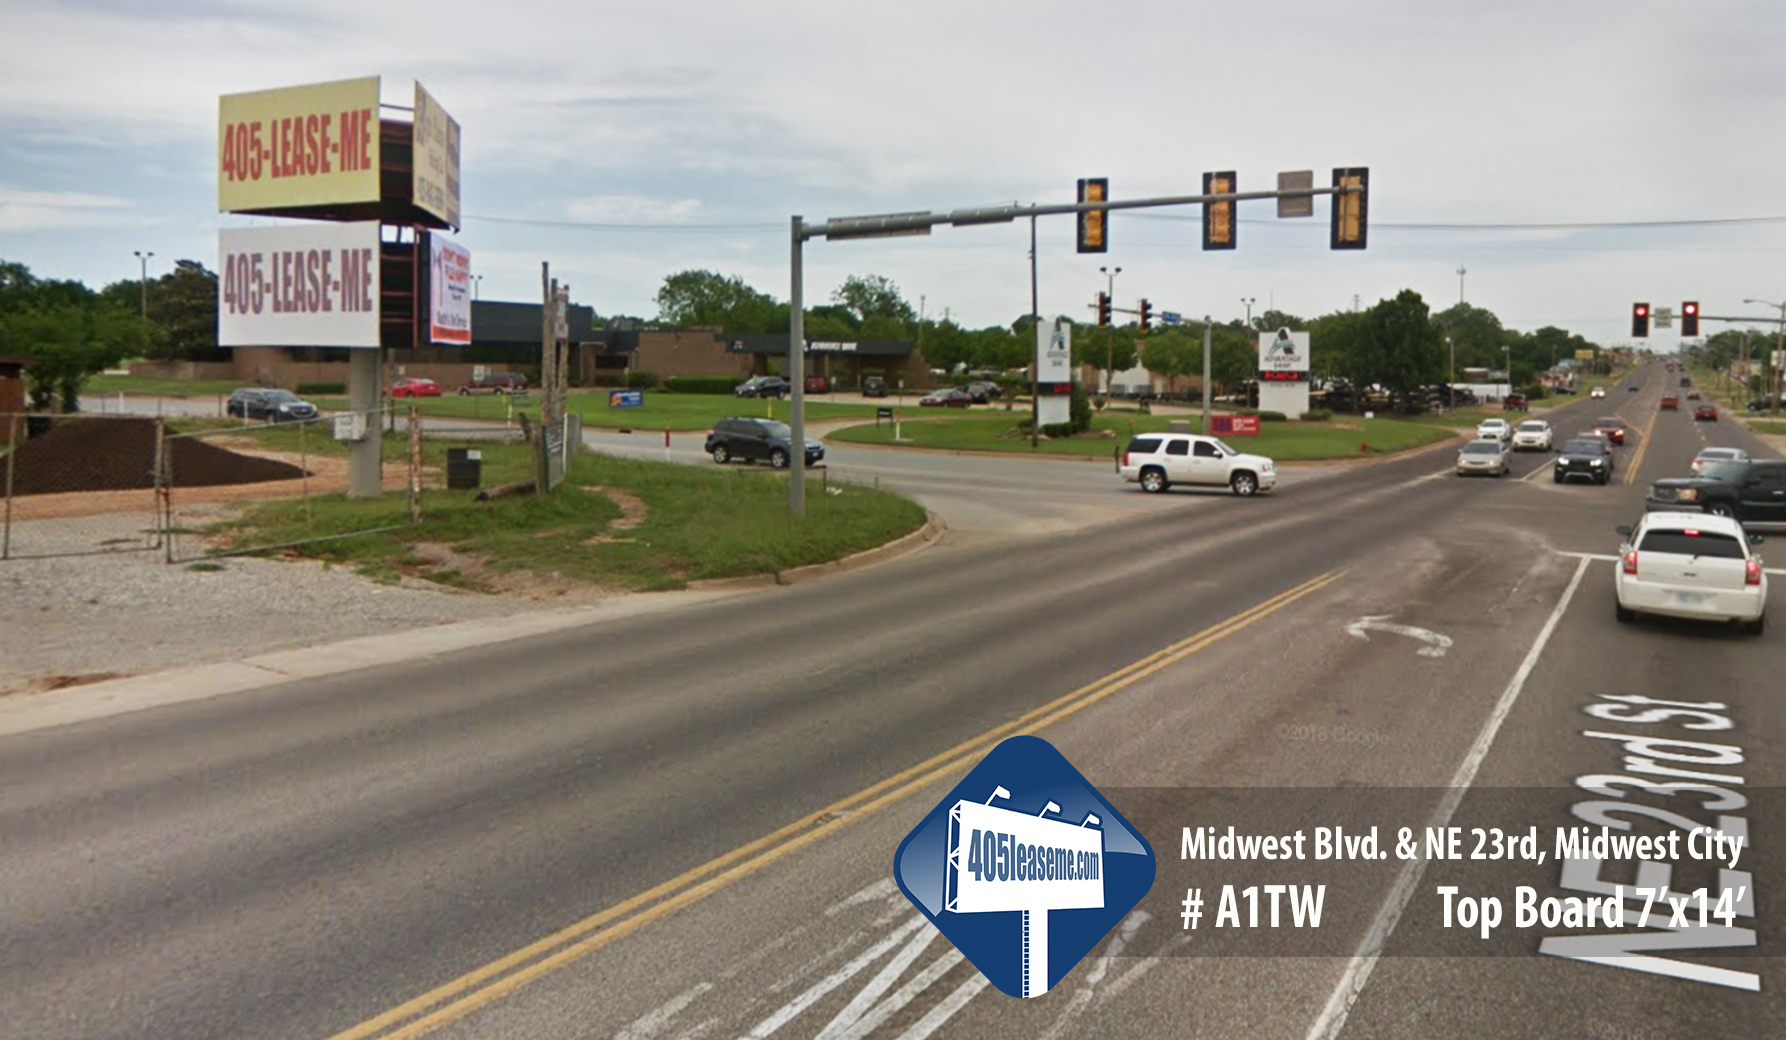 5 Midwest City - A1TW